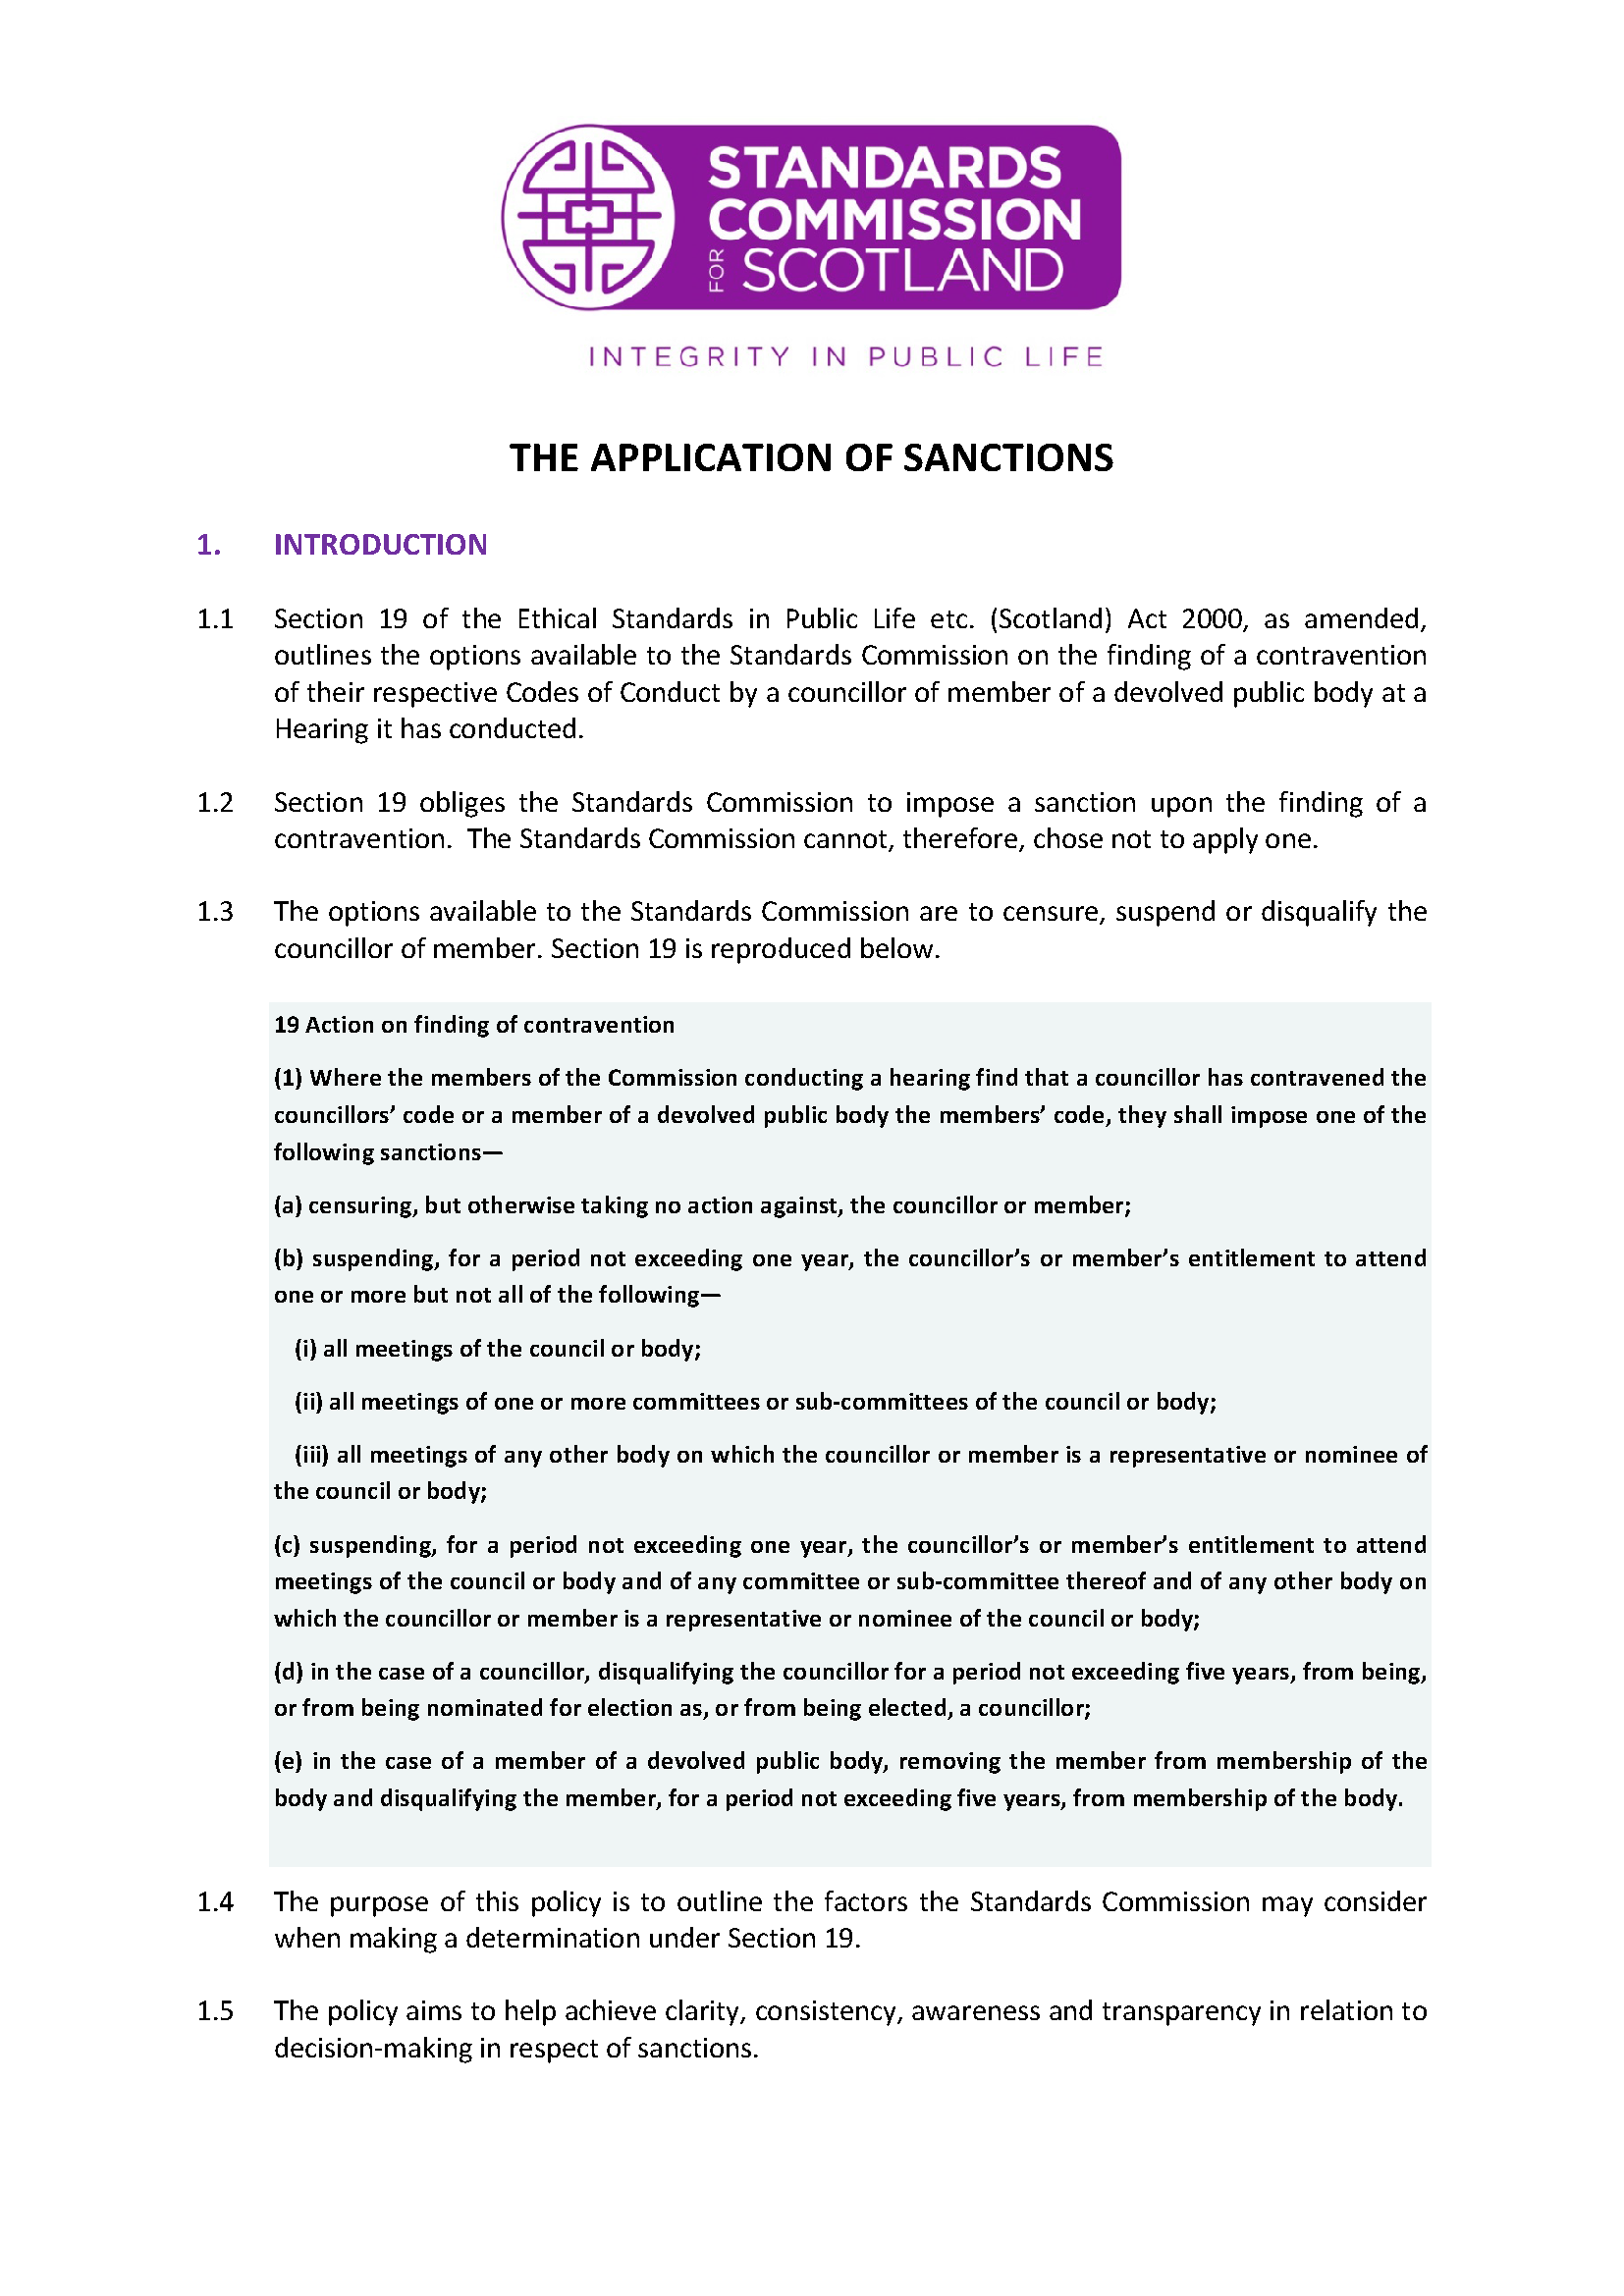 Policy on the Application of Sanctions